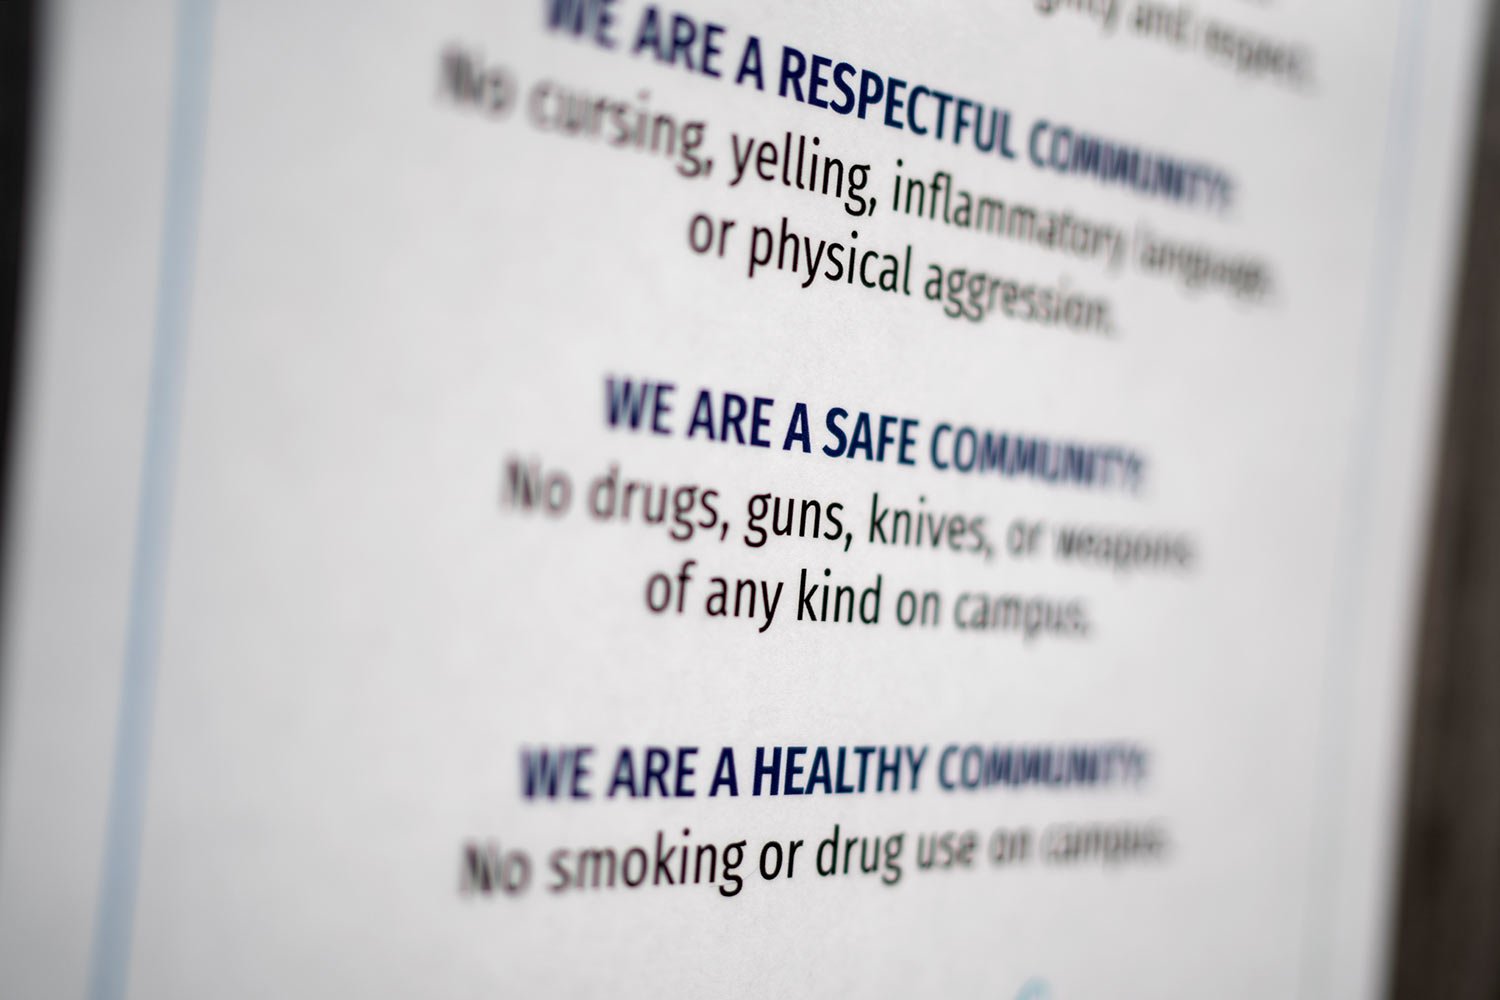  A sign is posted in an elevator prohibiting guns on the campus of Asbury First United Methodist Church, Tuesday, Aug. 22, 2023, in Rochester, N.Y. (AP Photo/David Goldman)  